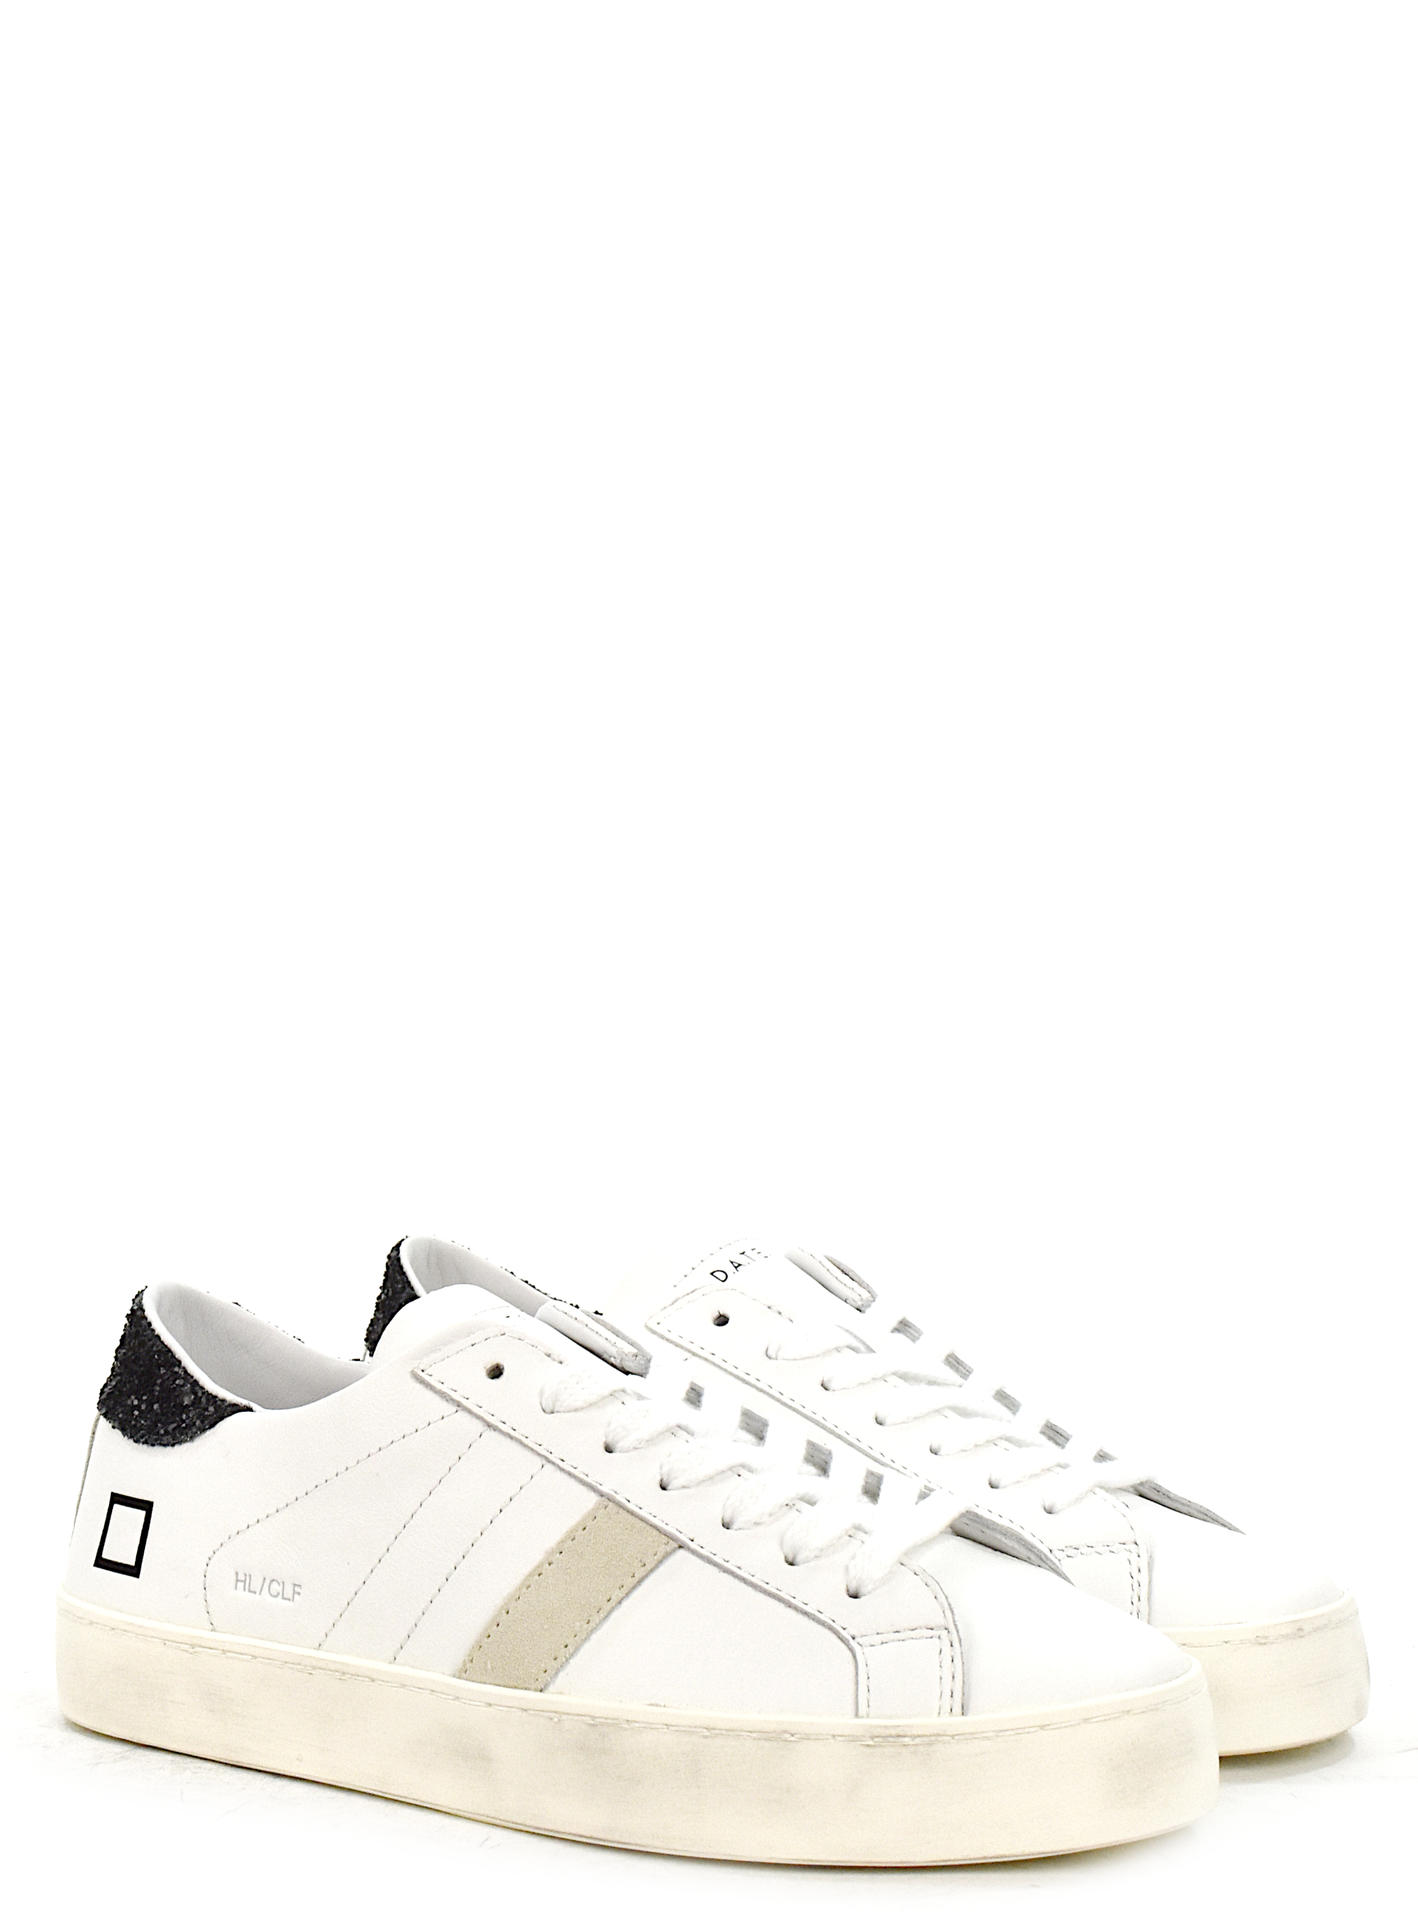 SNEAKERS D.A.T.E HLCAWBD BIANCO/NERO